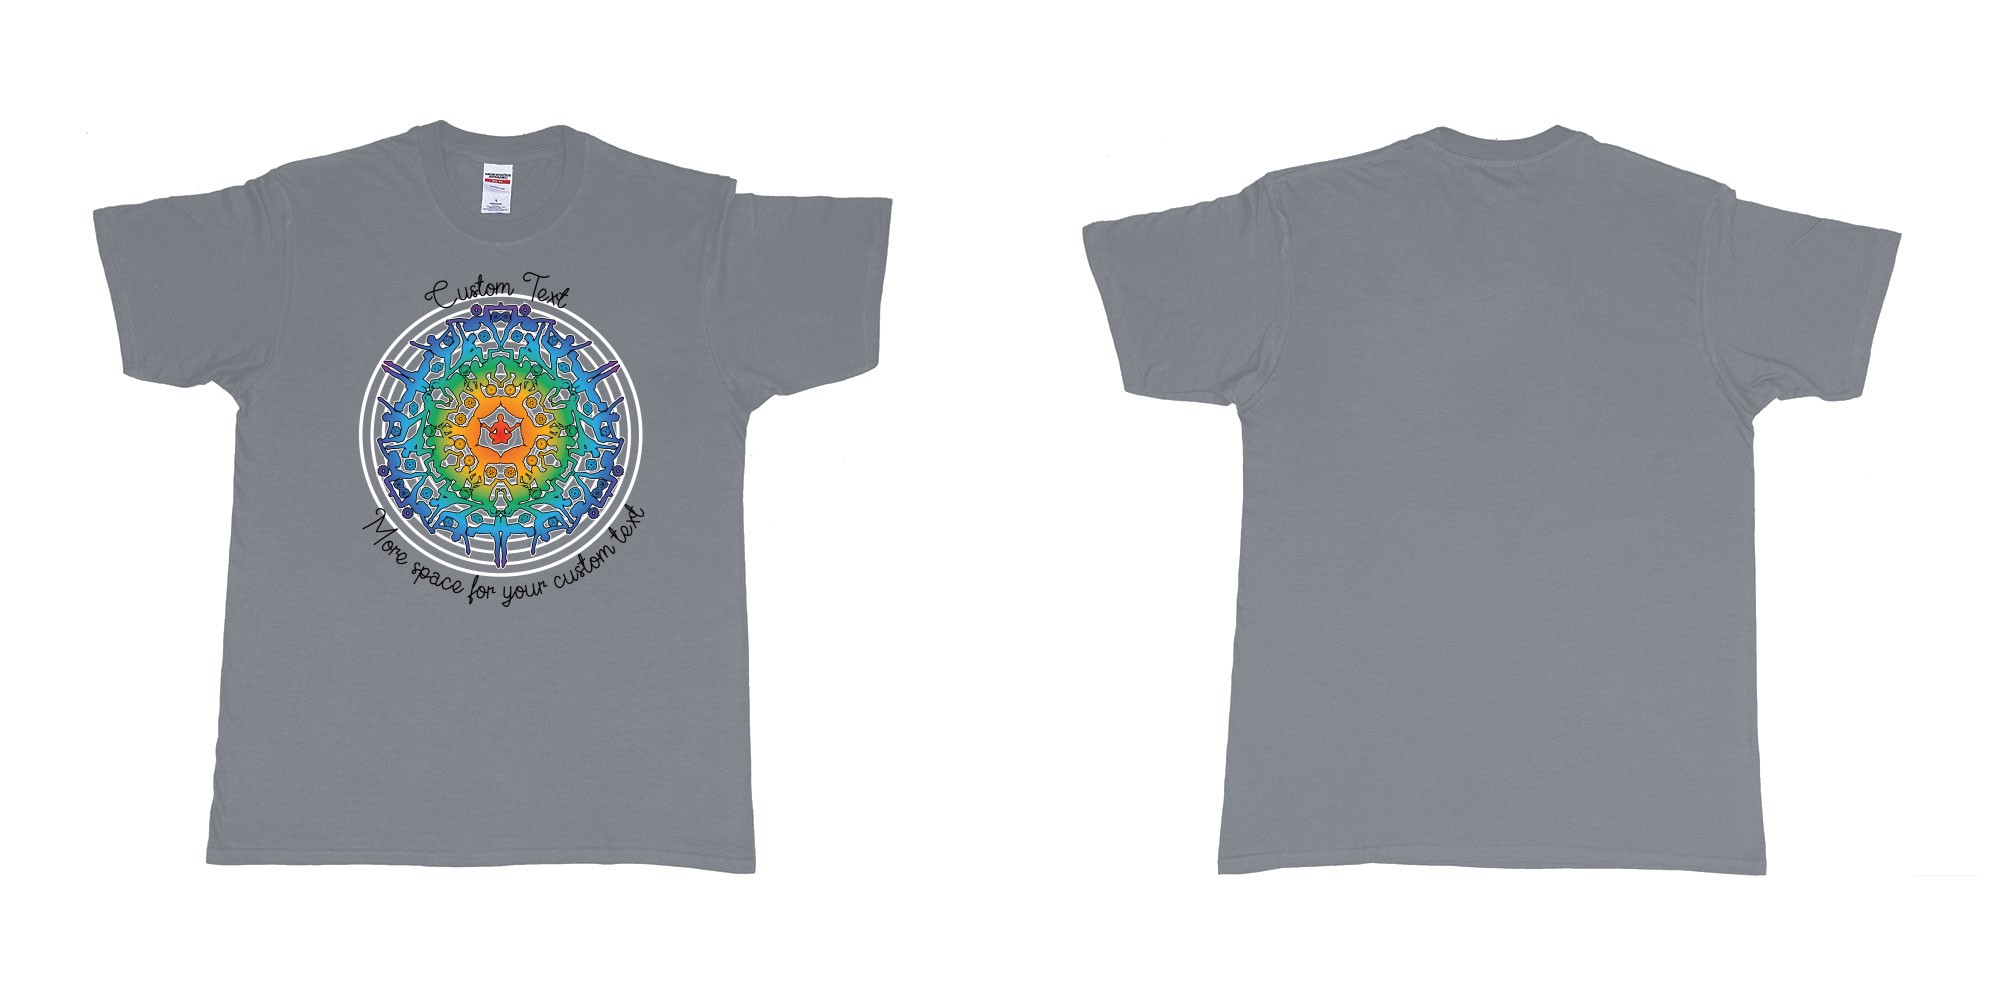 Custom tshirt design yoga mandala in fabric color misty choice your own text made in Bali by The Pirate Way